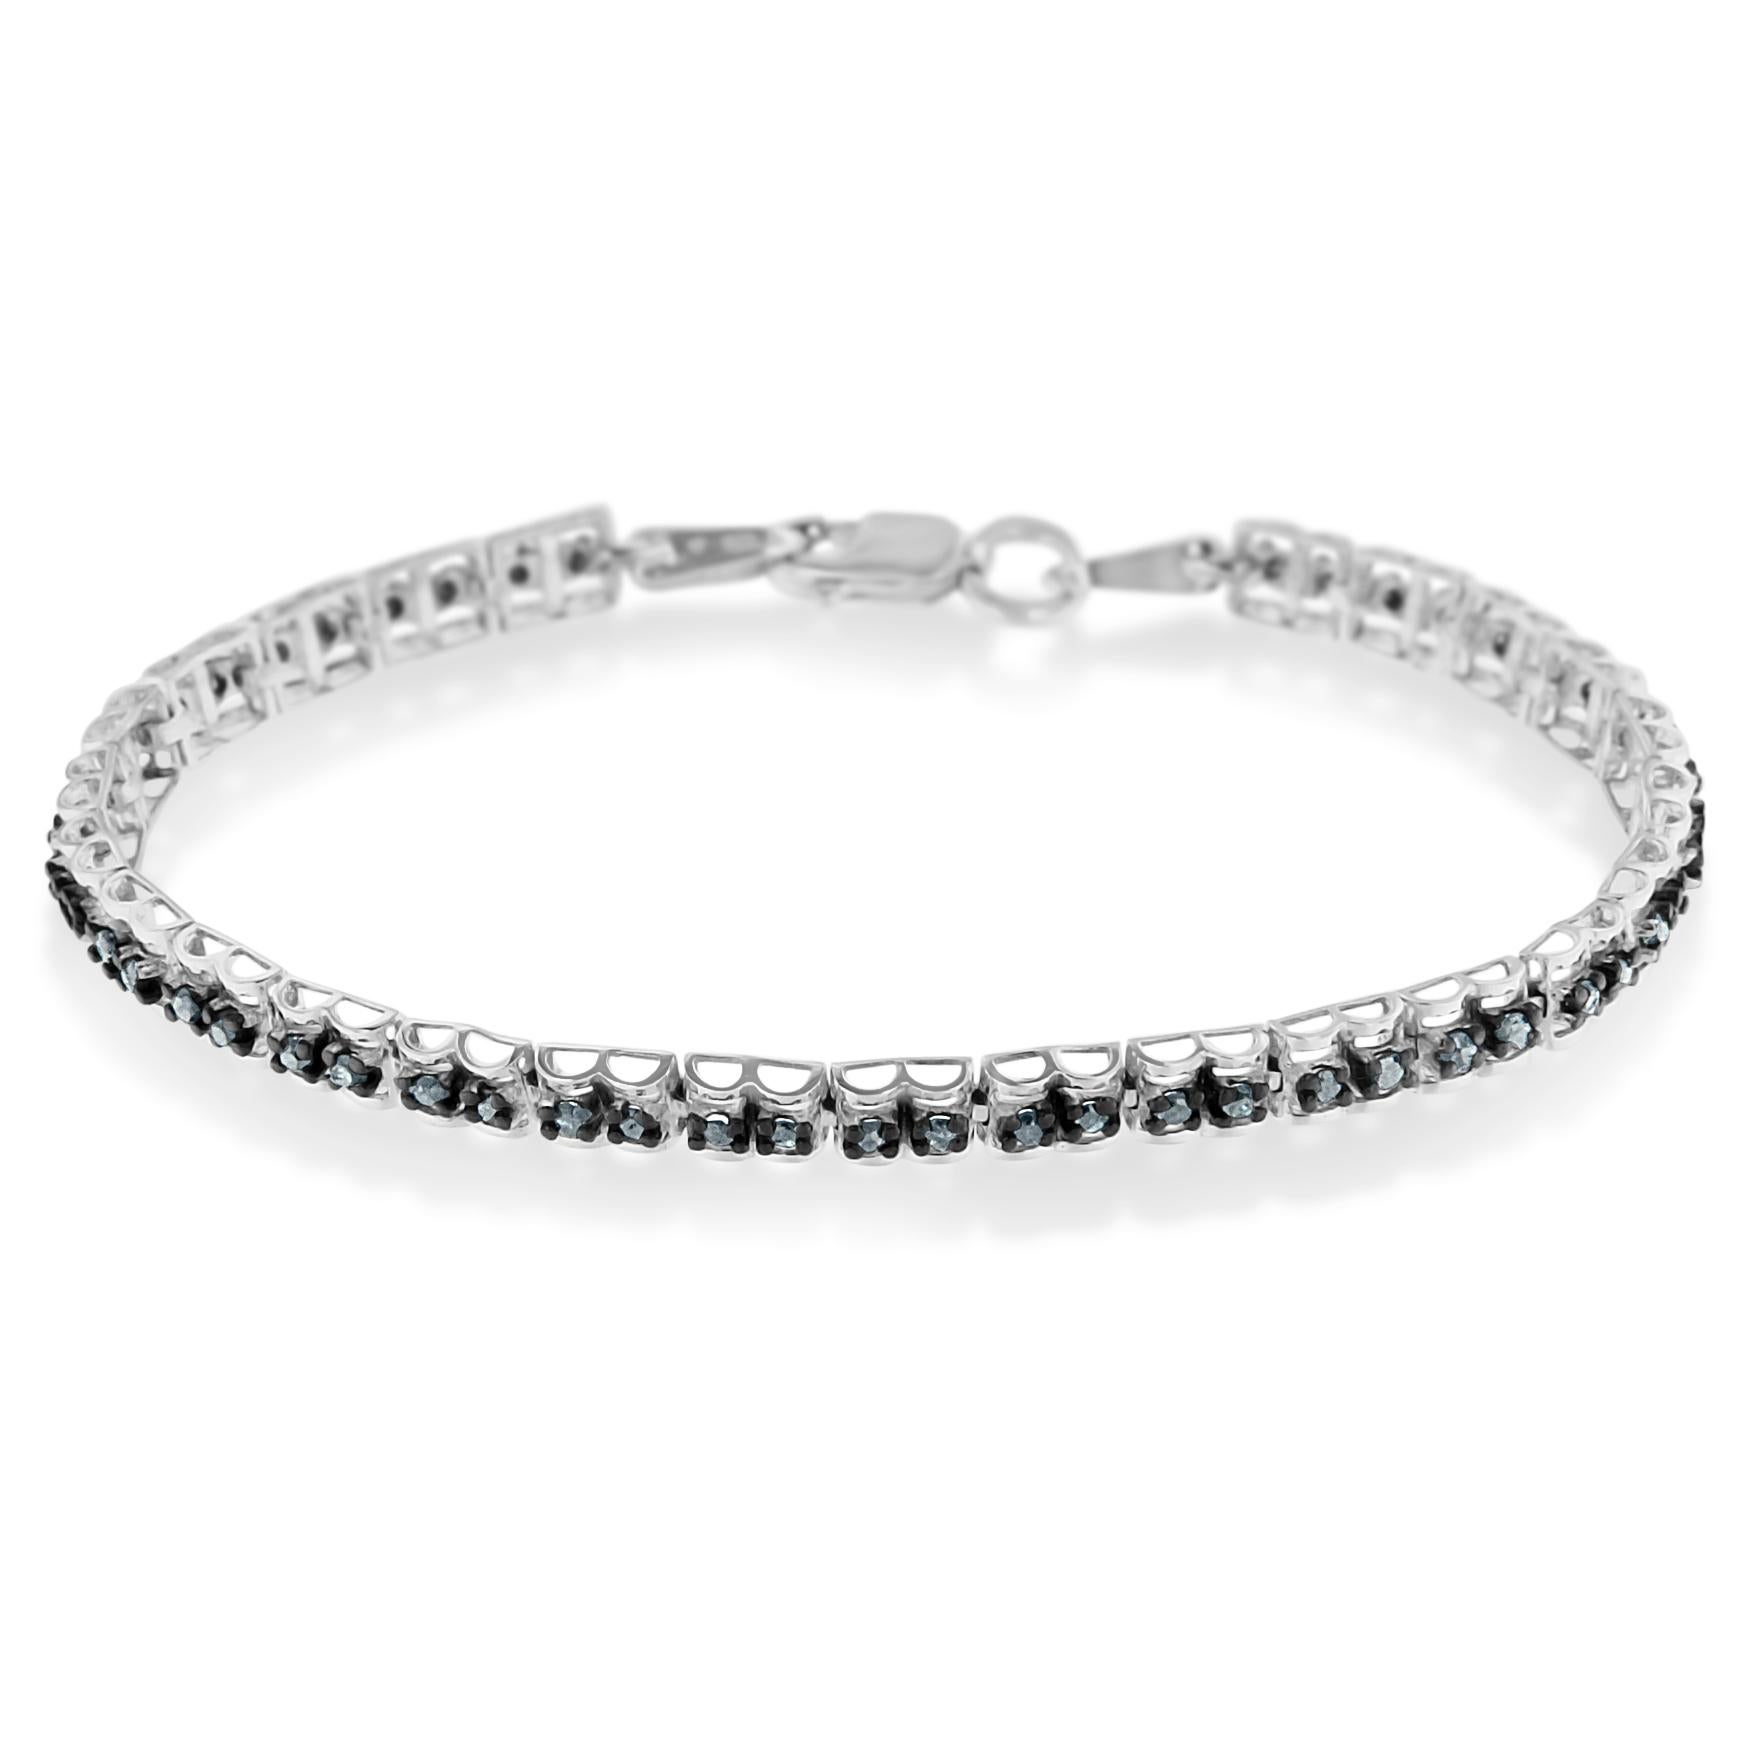 Add a touch of color and sparkle to your jewelry box with this color-treated double link rose diamond tennis bracelet. One carat worth of diamonds are elegantly set in sterling silver for a high end look. Whether given as a gift to a loved one or a